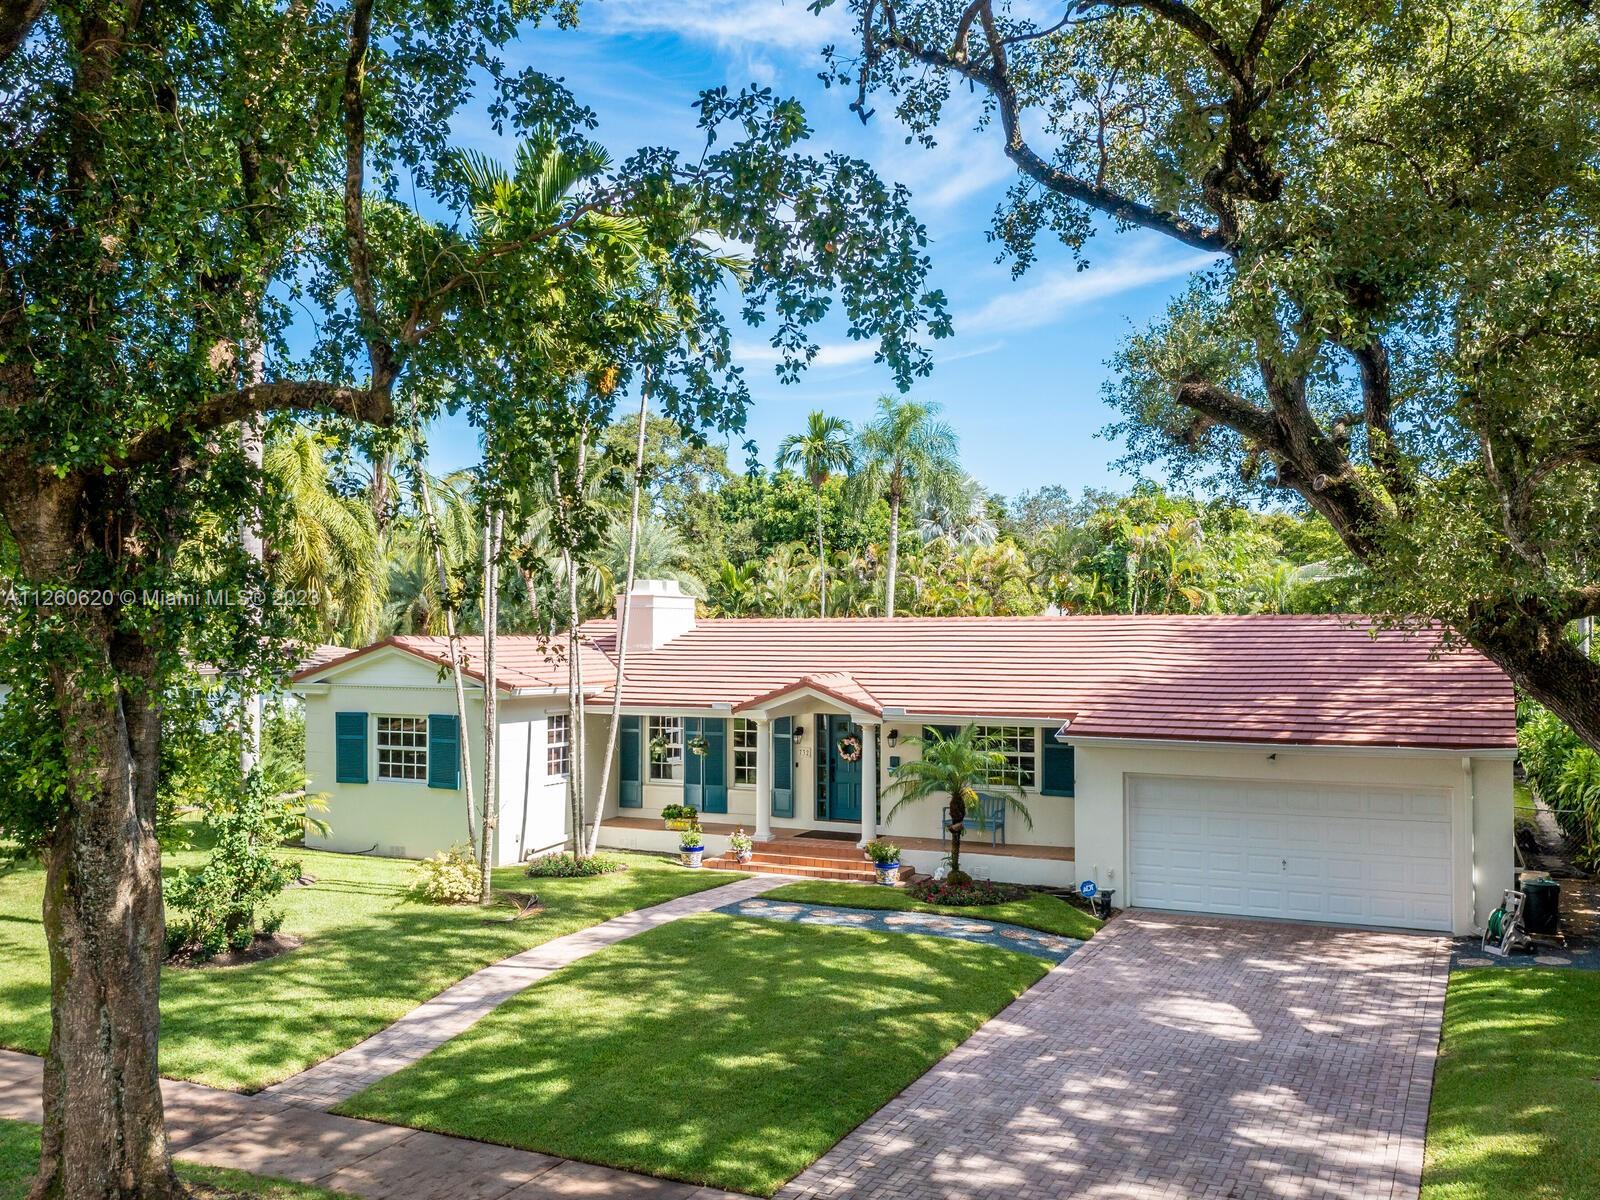 Lovely Spanish style home in the Country Club Coral Gables area. As per last Area Calculation Living Area 2,333.22 SF (under a/c). This 13,900 sq. ft. lot offers an opportunity to expand in the future, 3 bd, 3 br in the main house, and 1 bd/1 br in-law quarters with view of the swimming pool and garden. Hardwood floors throughout, working fireplace, updated granite stainless steel kitchen with formal dining room. 7 years old roof. Impact windows, oversized 2 car garage, a beautiful screened-in pool. This is turnkey with plenty of room for expansion. This house is just 5 minutes away from Downtown Coral Gables, and shops at Merrick Park. Close to Biltmore Hotel.